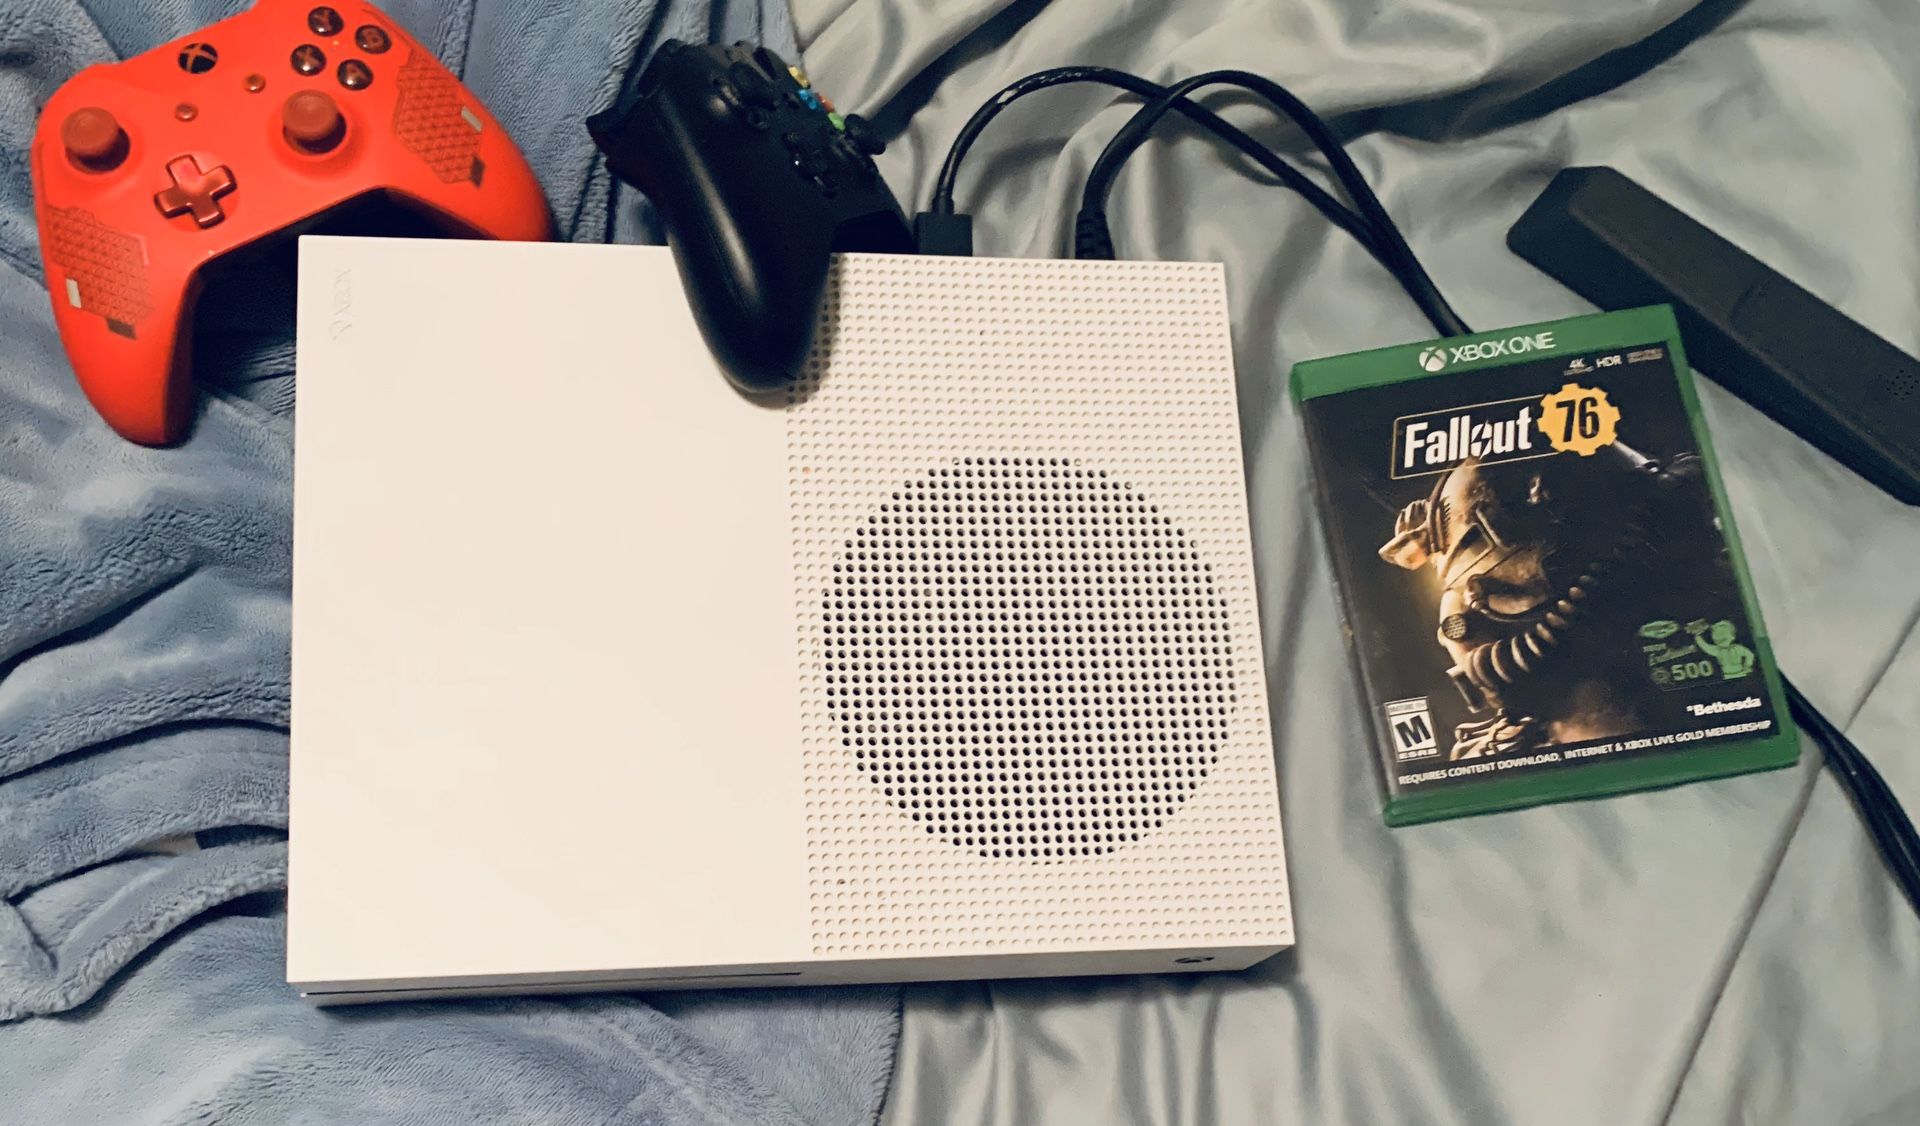 Xbox one S and two controllers and fallout76 and Tom Clancy’s division 2